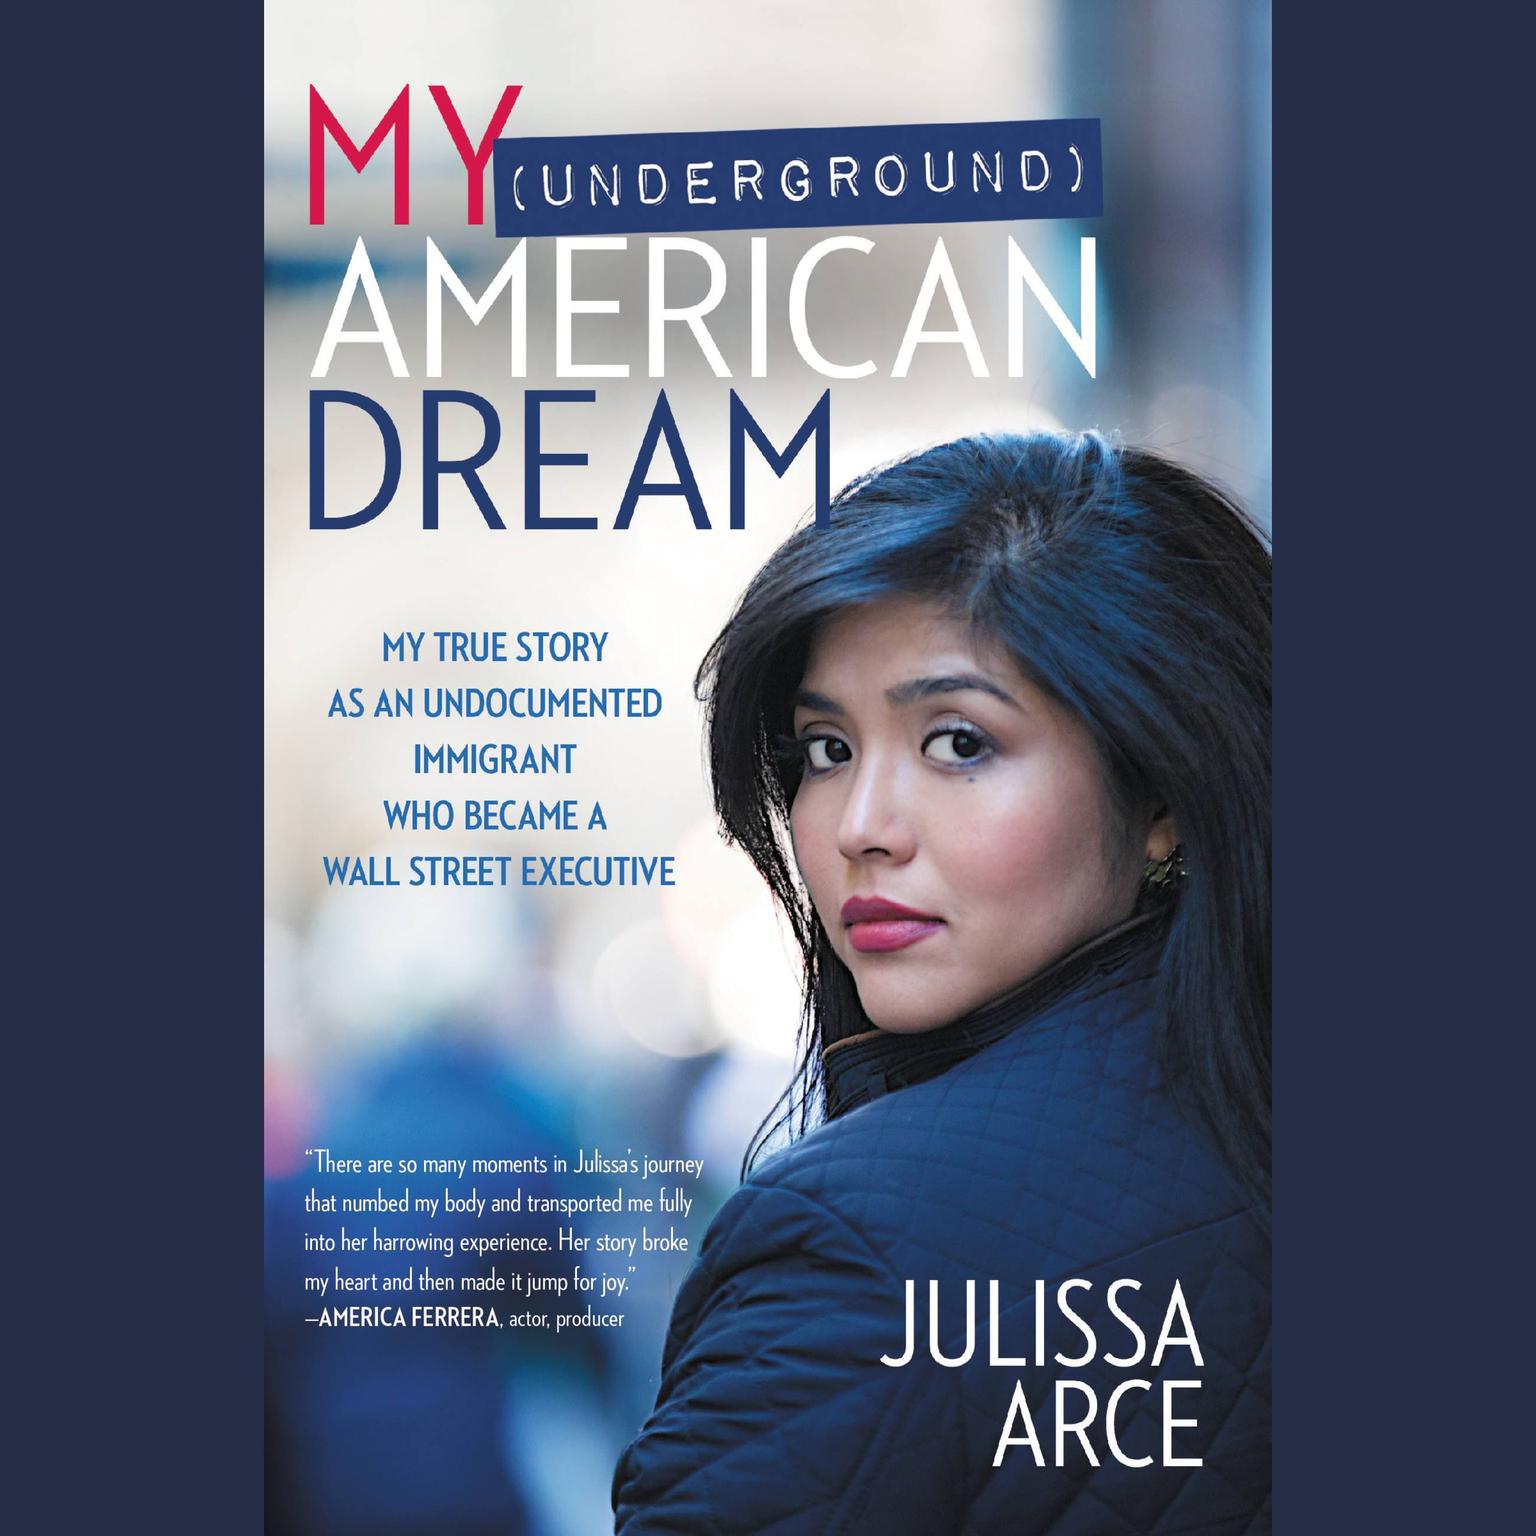 My (Underground) American Dream: My True Story as an Undocumented Immigrant Who Became a Wall Street Executive Audiobook, by Julissa Arce